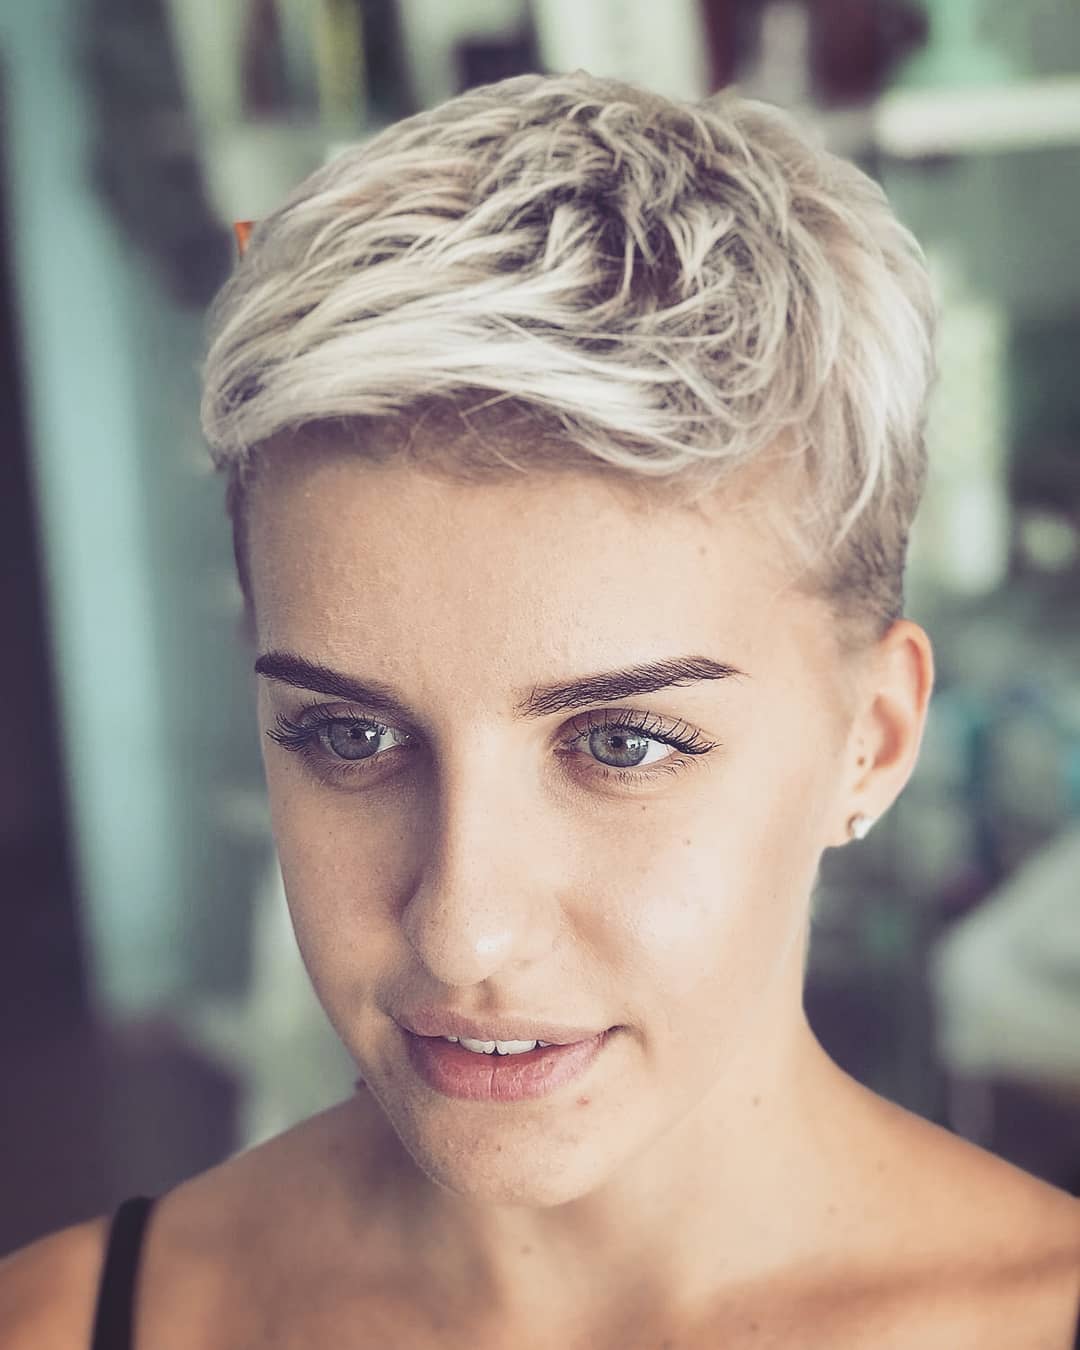 10 Trendy Very Short Haircuts For Female Cool Short Hair Styles 2020